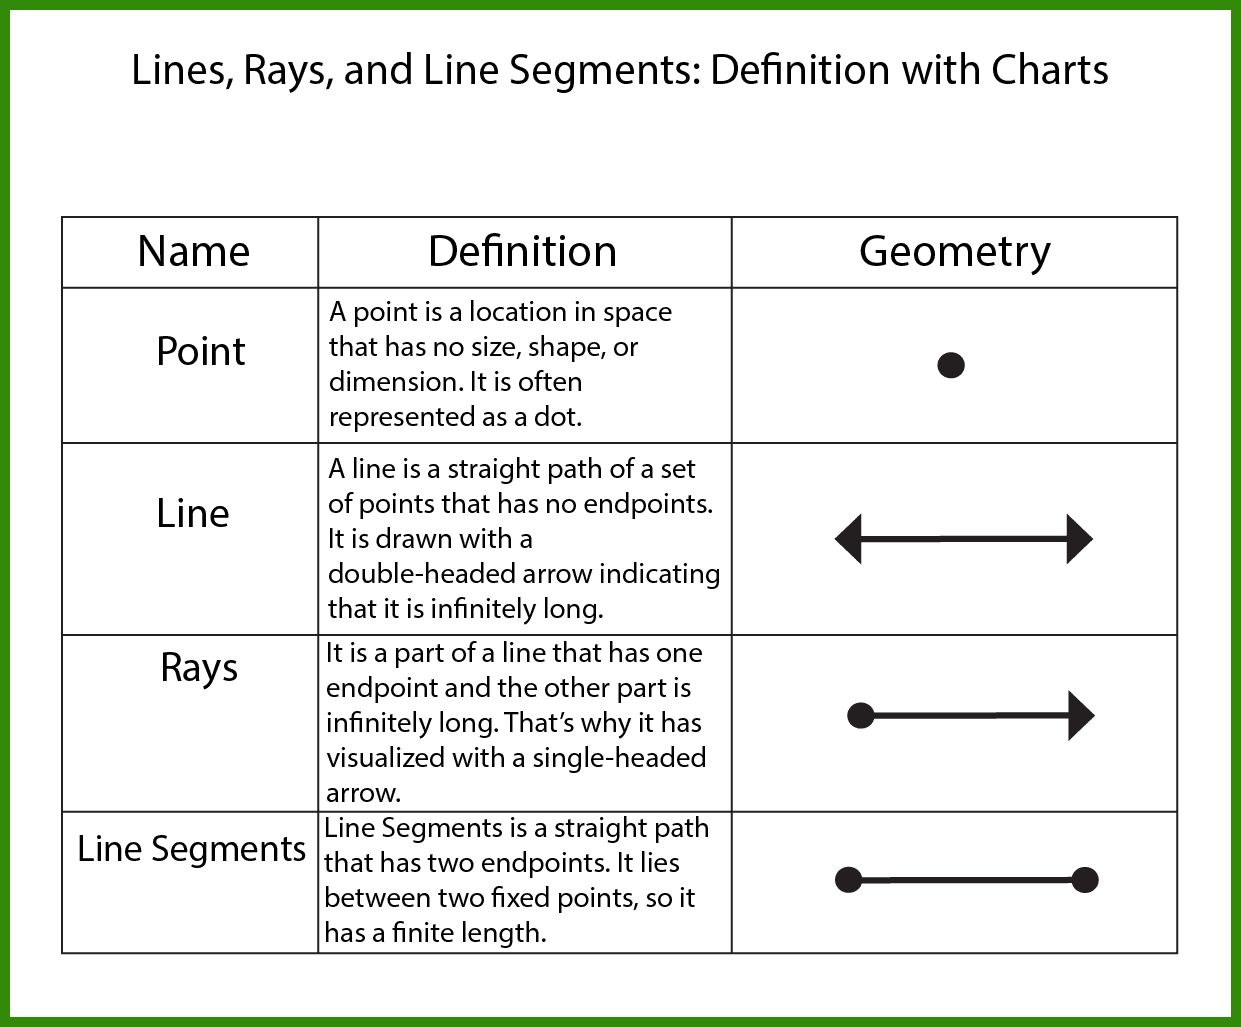 Free Lines Rays and Line Segments Worksheet | 10+ Pages